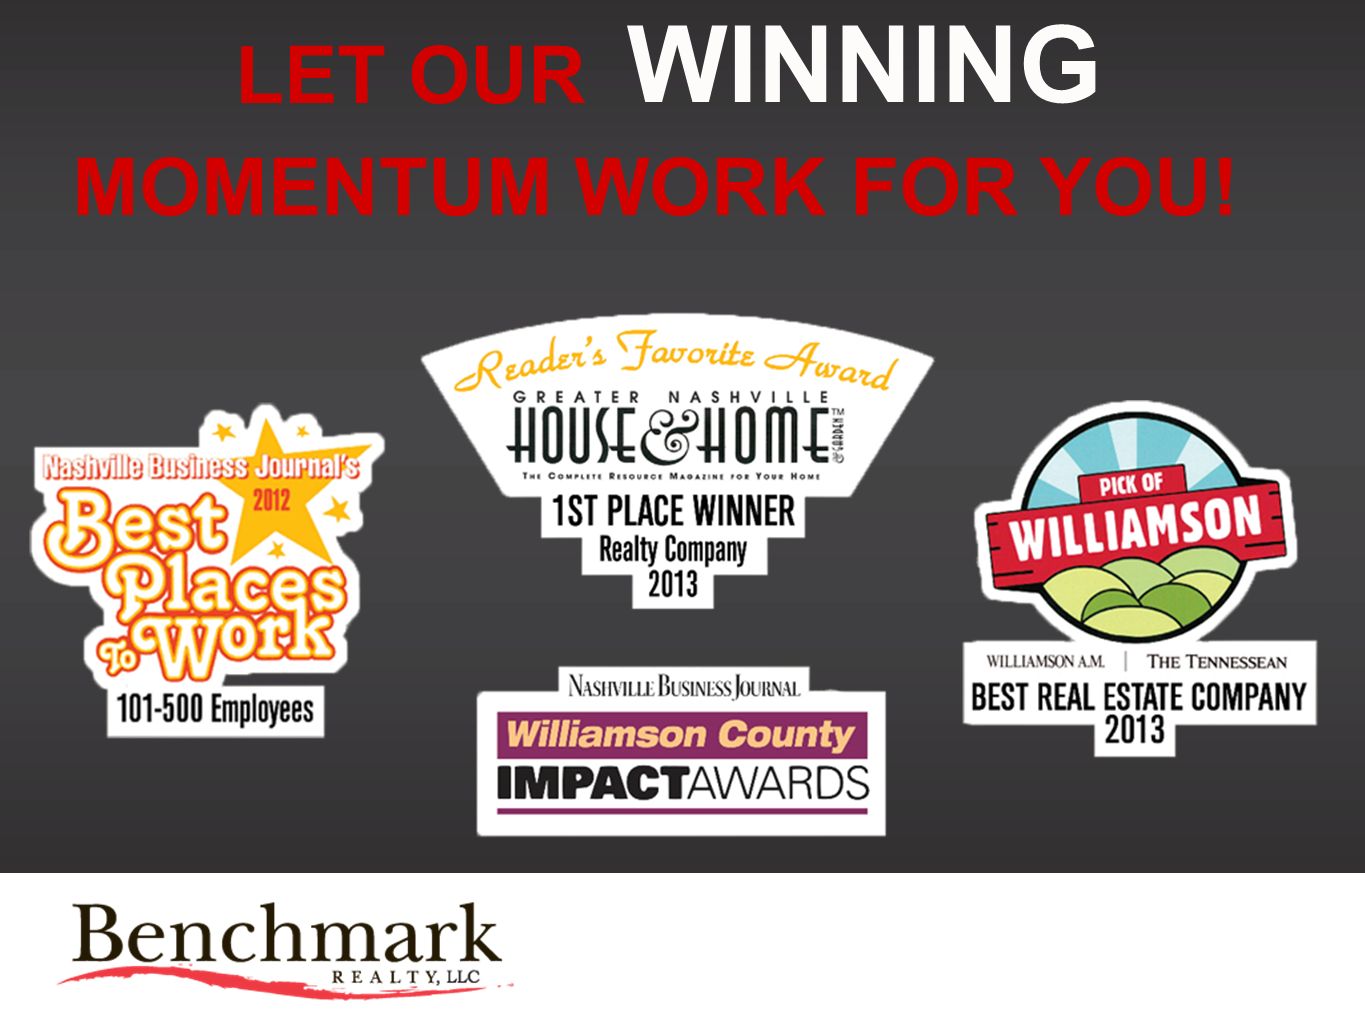 LET OUR WINNING MOMENTUM WORK FOR YOU!